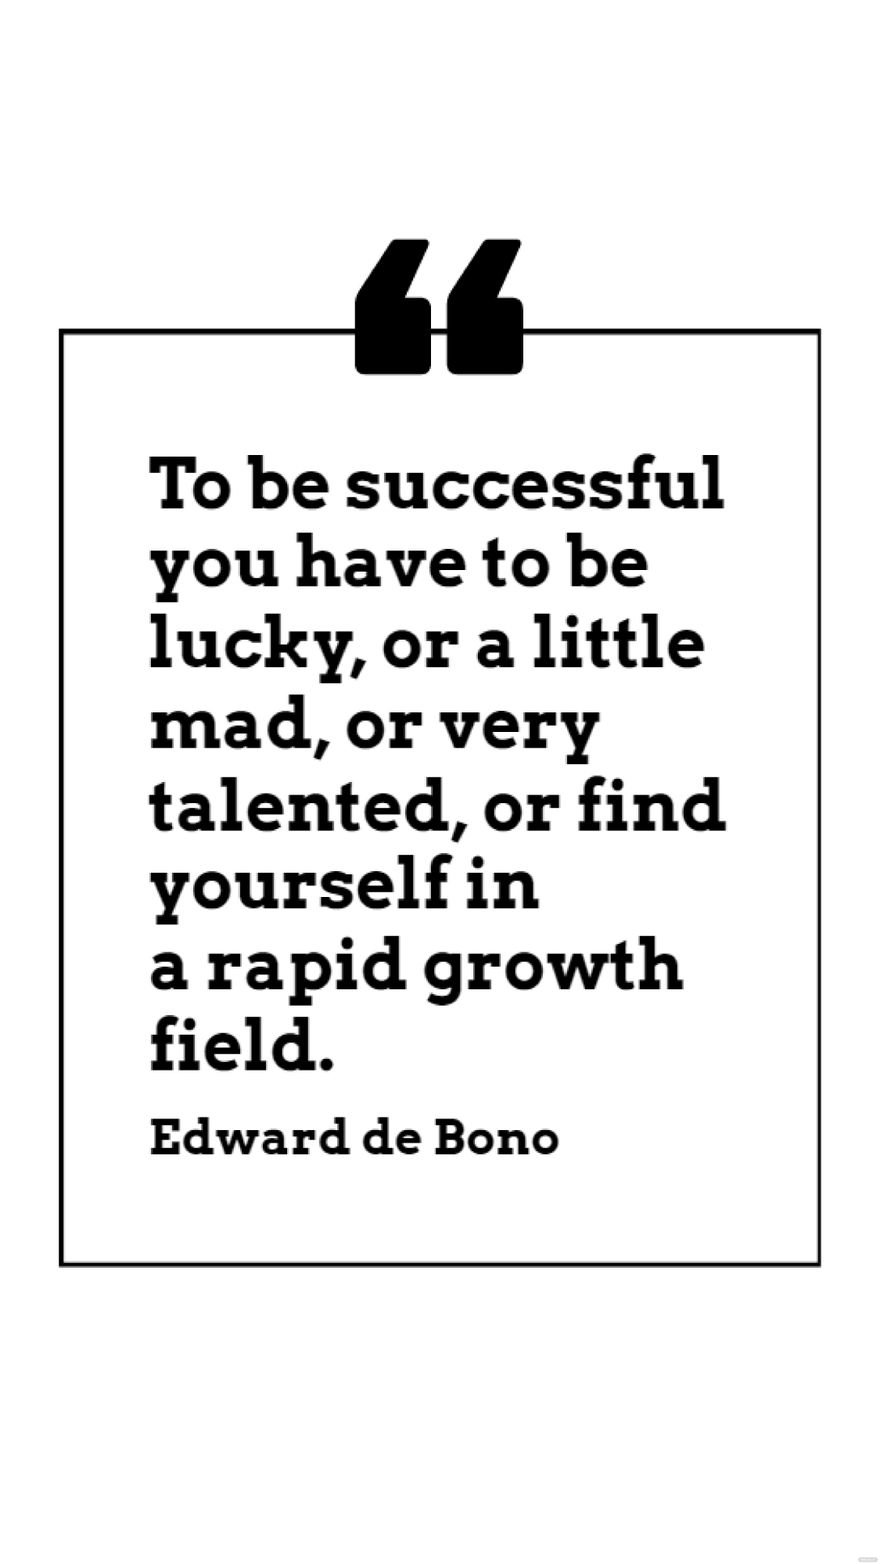 Free Edward de Bono - To be successful you have to be lucky, or a little mad, or very talented, or find yourself in a rapid growth field.